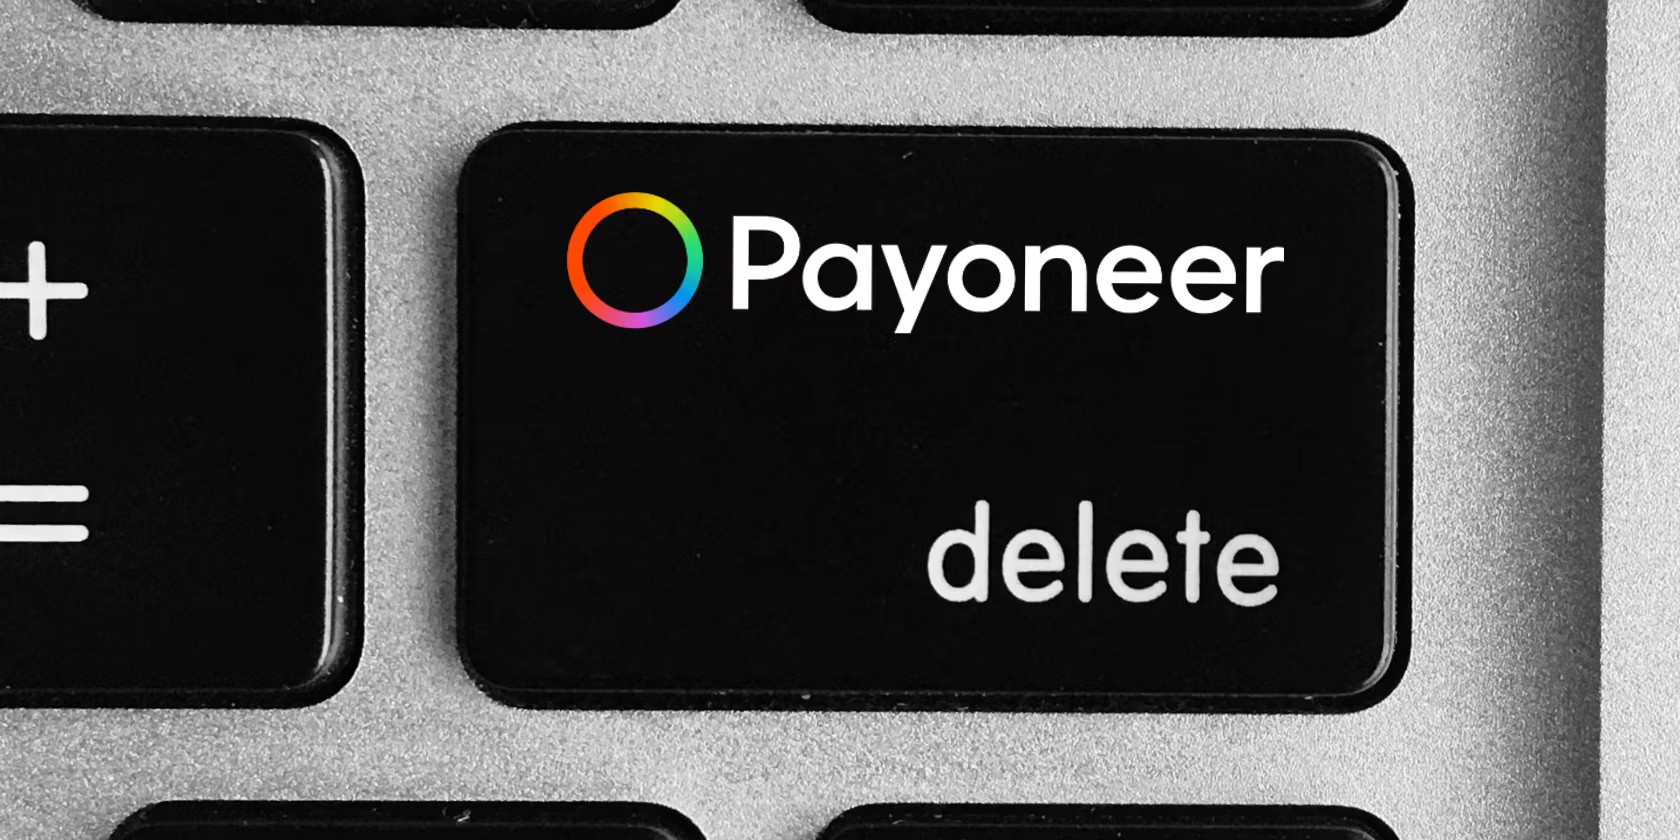 How To Delete A Payoneer Account